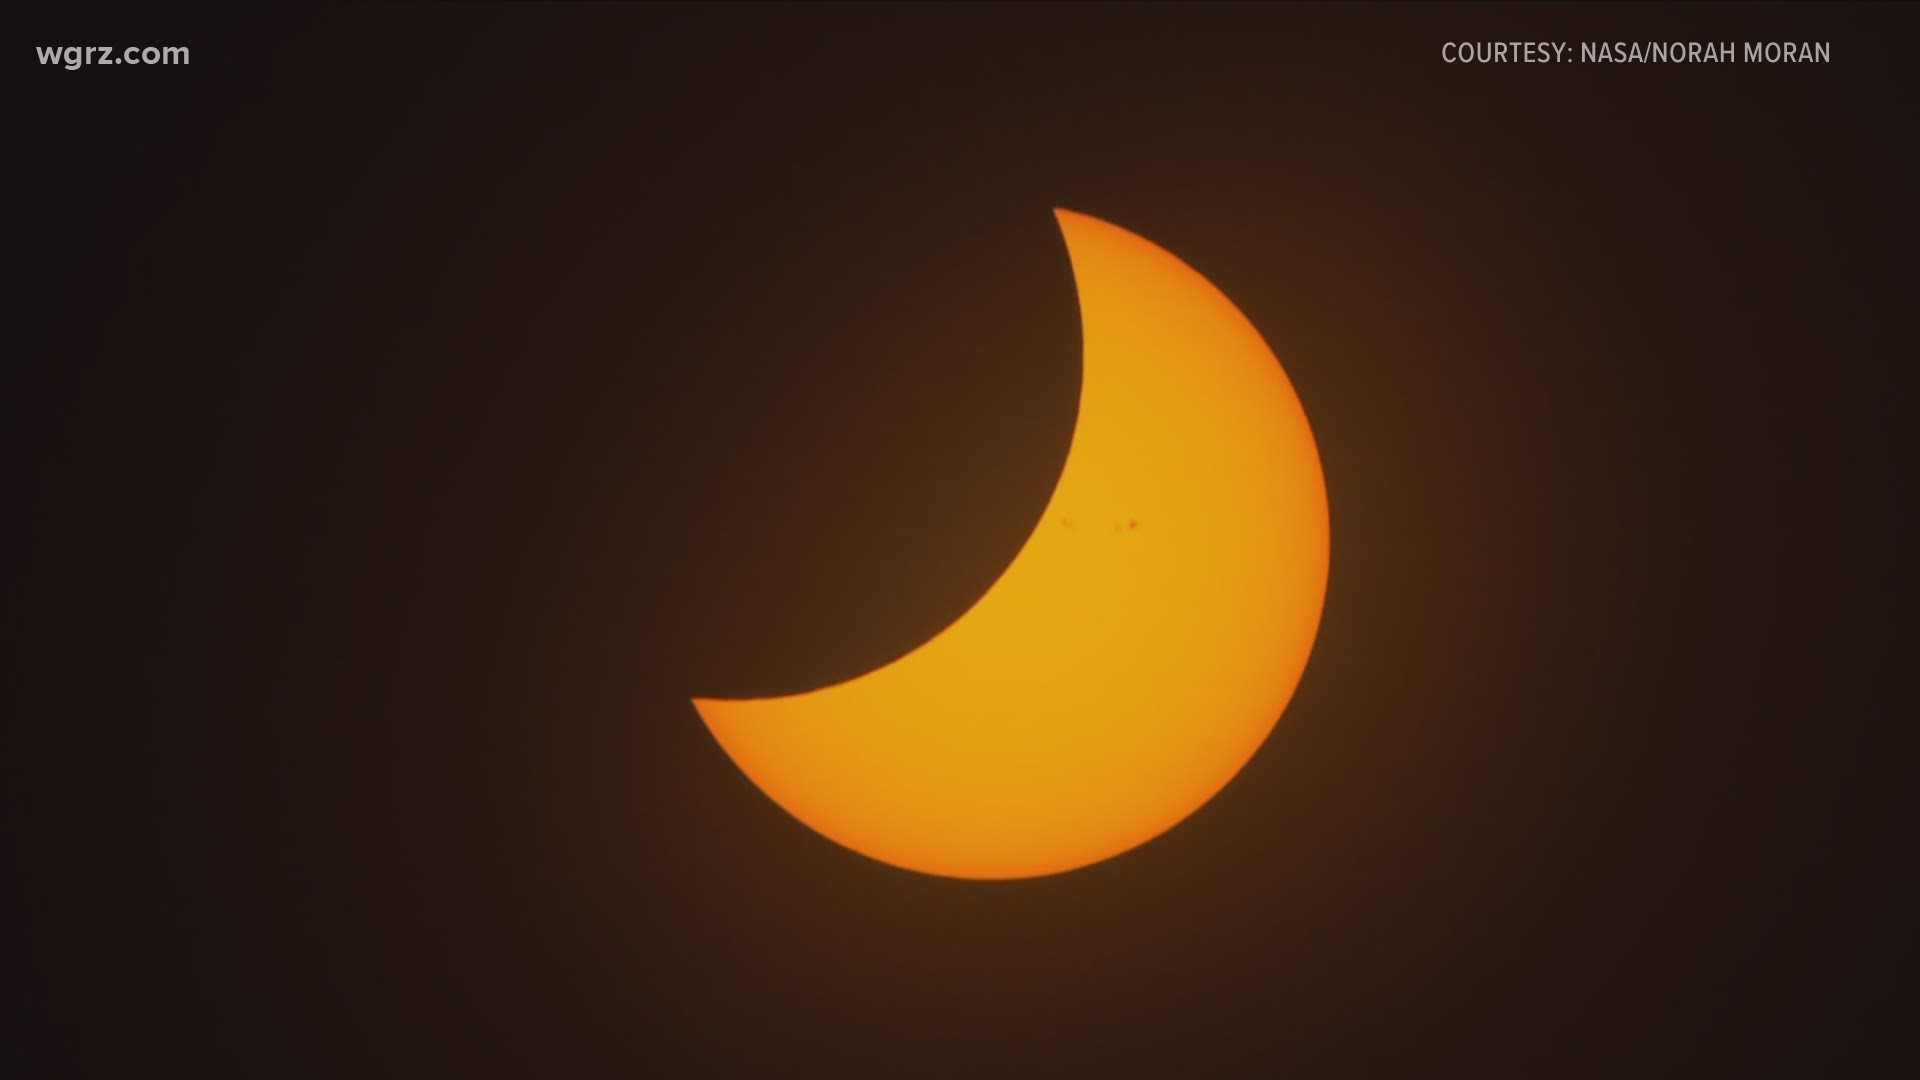 key time here is 5:39 a.m., when the moon will be covering nearly 80 percent of the sun, our local peak in this year's partial solar eclipse